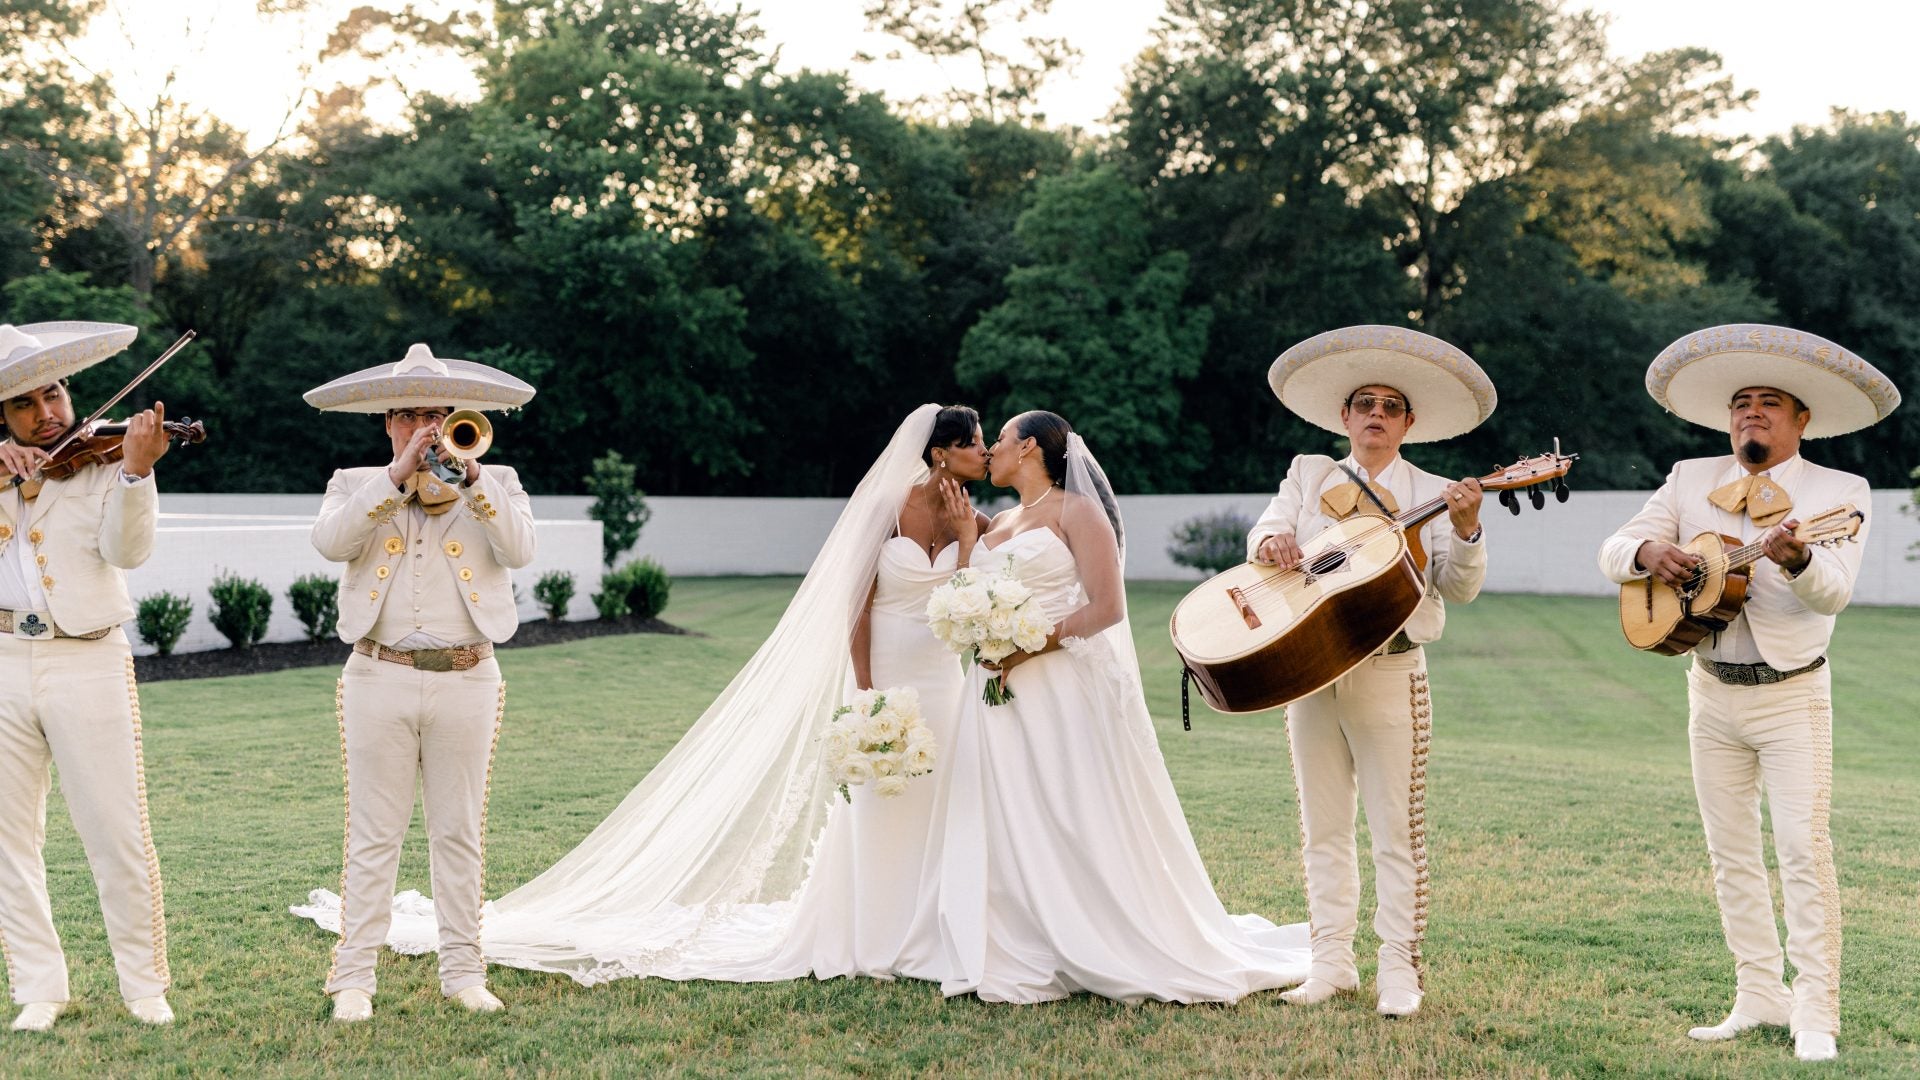 Bridal Bliss: Bianca And Tannis Jumped The Broom In A Magical Celebration In Houston